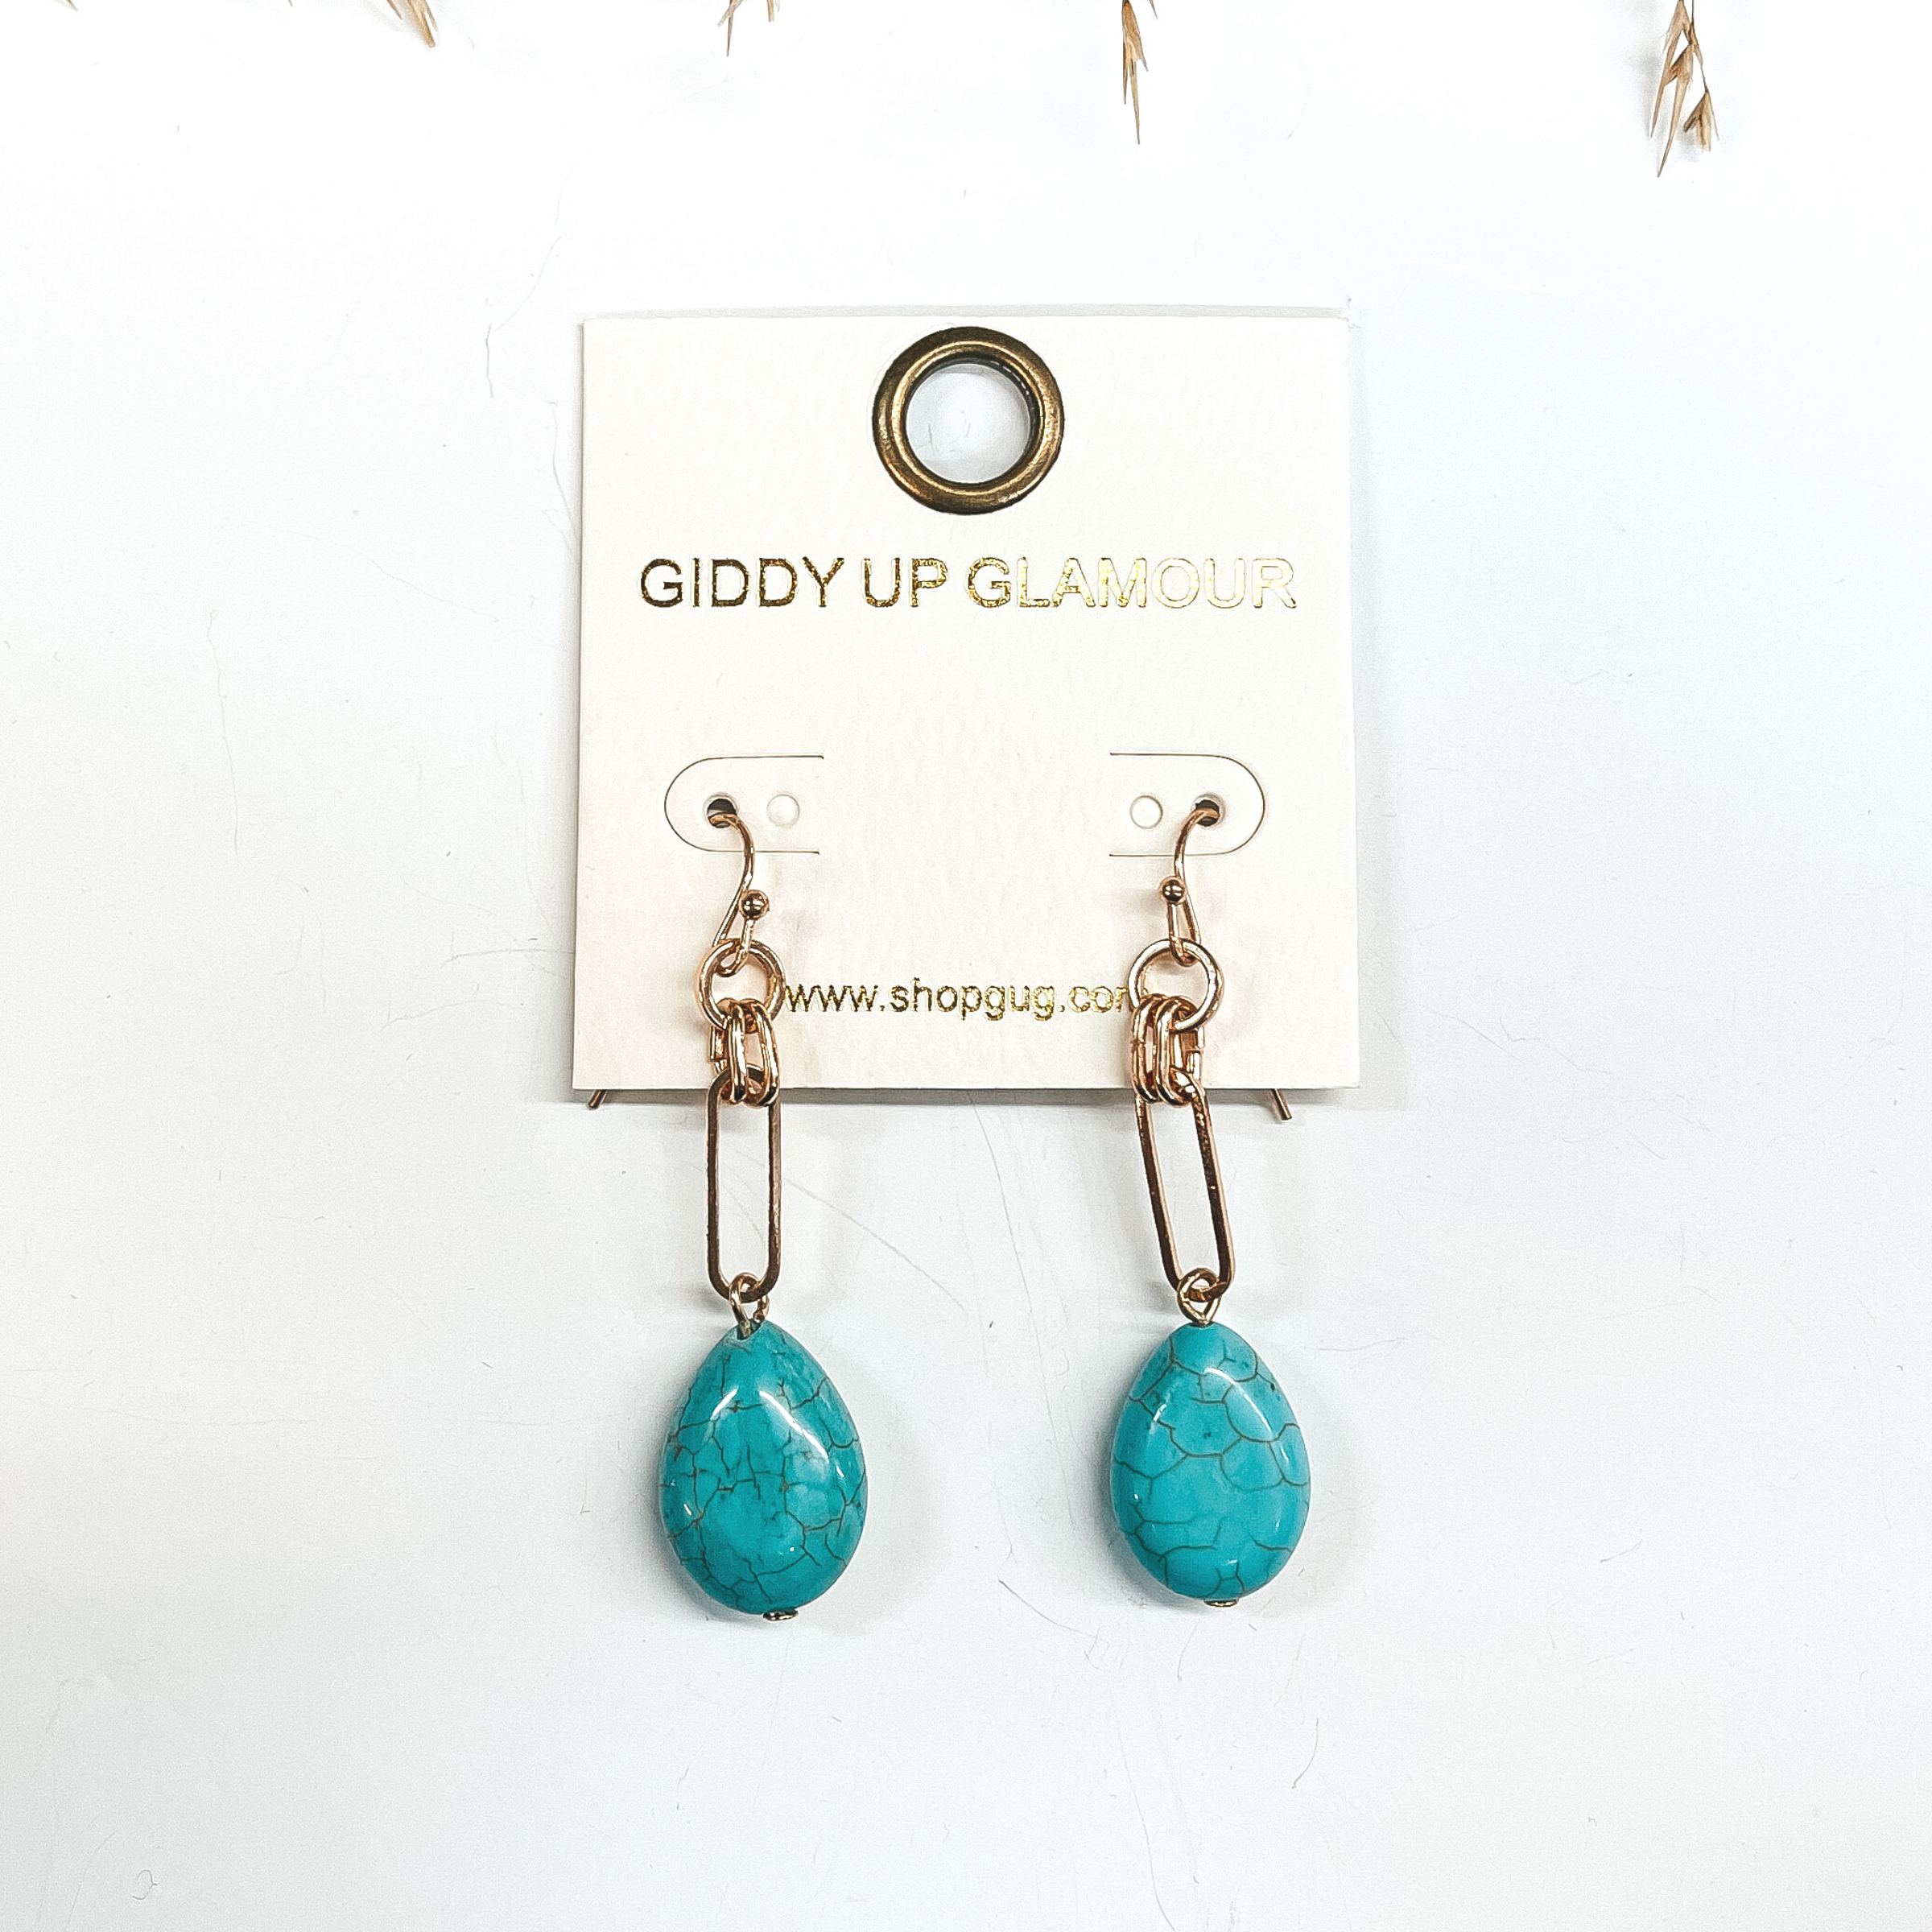 Gold chain earrings with a faux turquoise stone drop. Taken on a white background with a brown plant in the  back as decor.